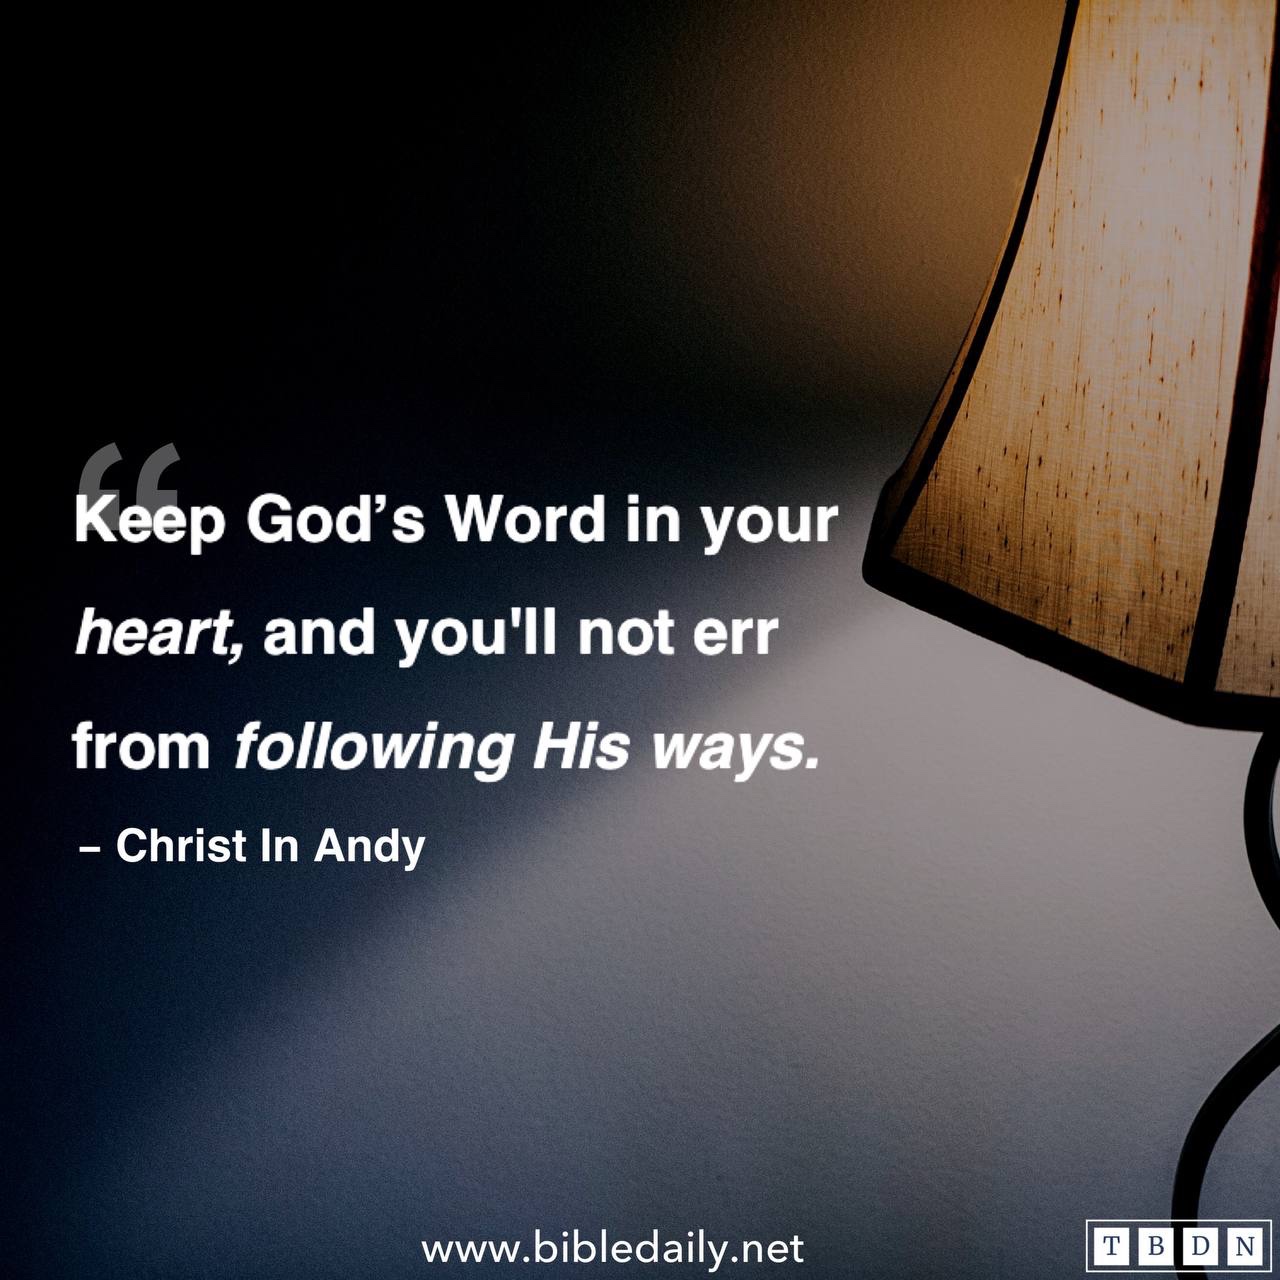 Hide God’s Word in Your Heart | The Bible Daily Network